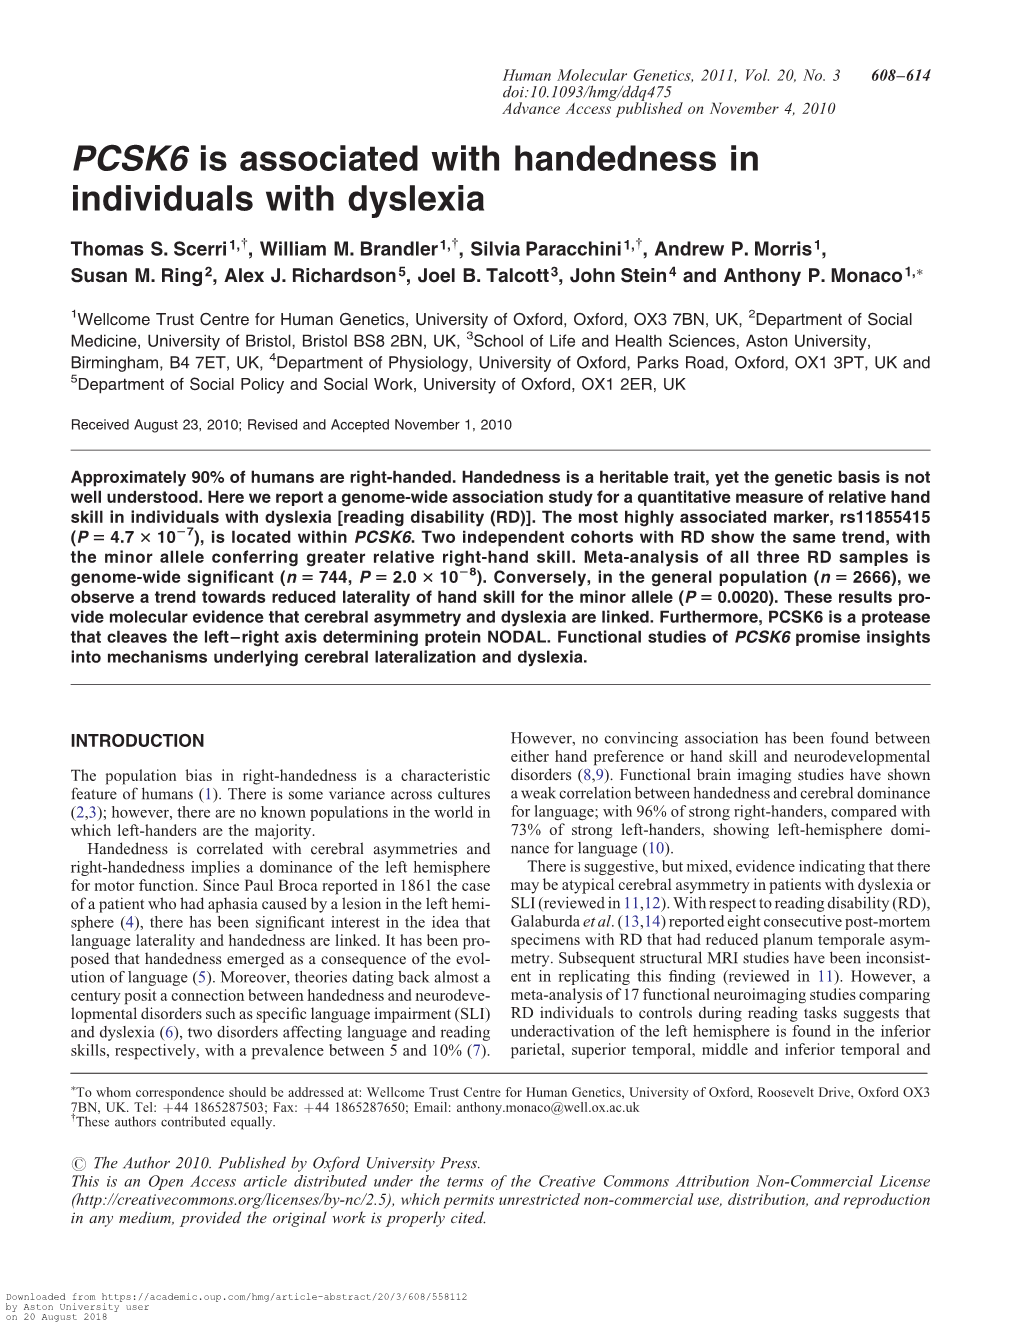 PCSK6 Is Associated with Handedness in Individuals with Dyslexia